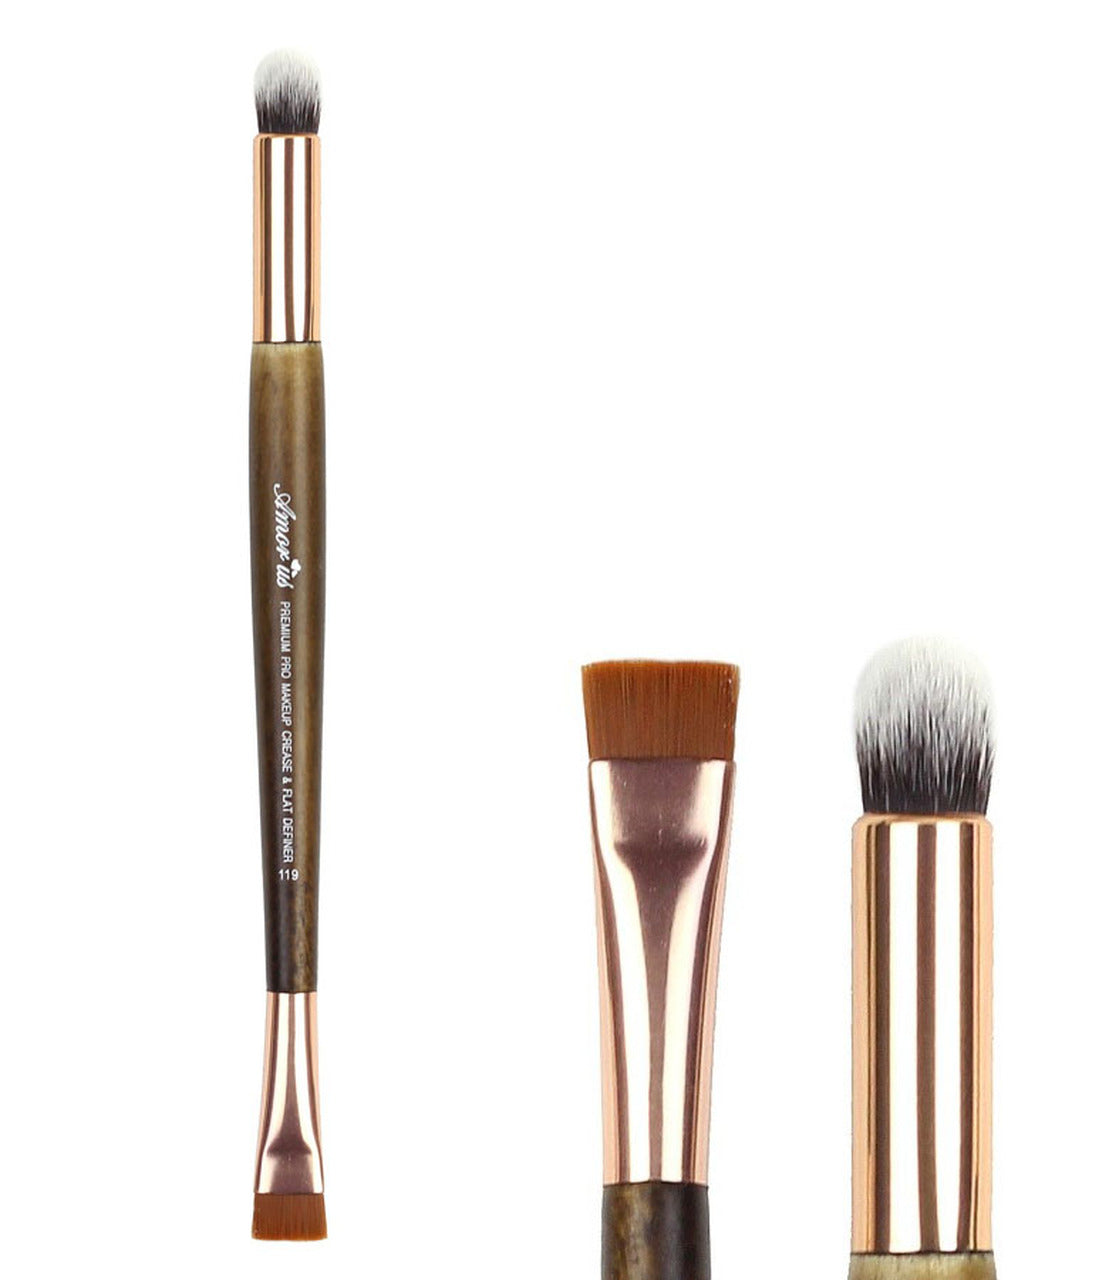 Crease & Flat Definer DUO Brush by Amor Us